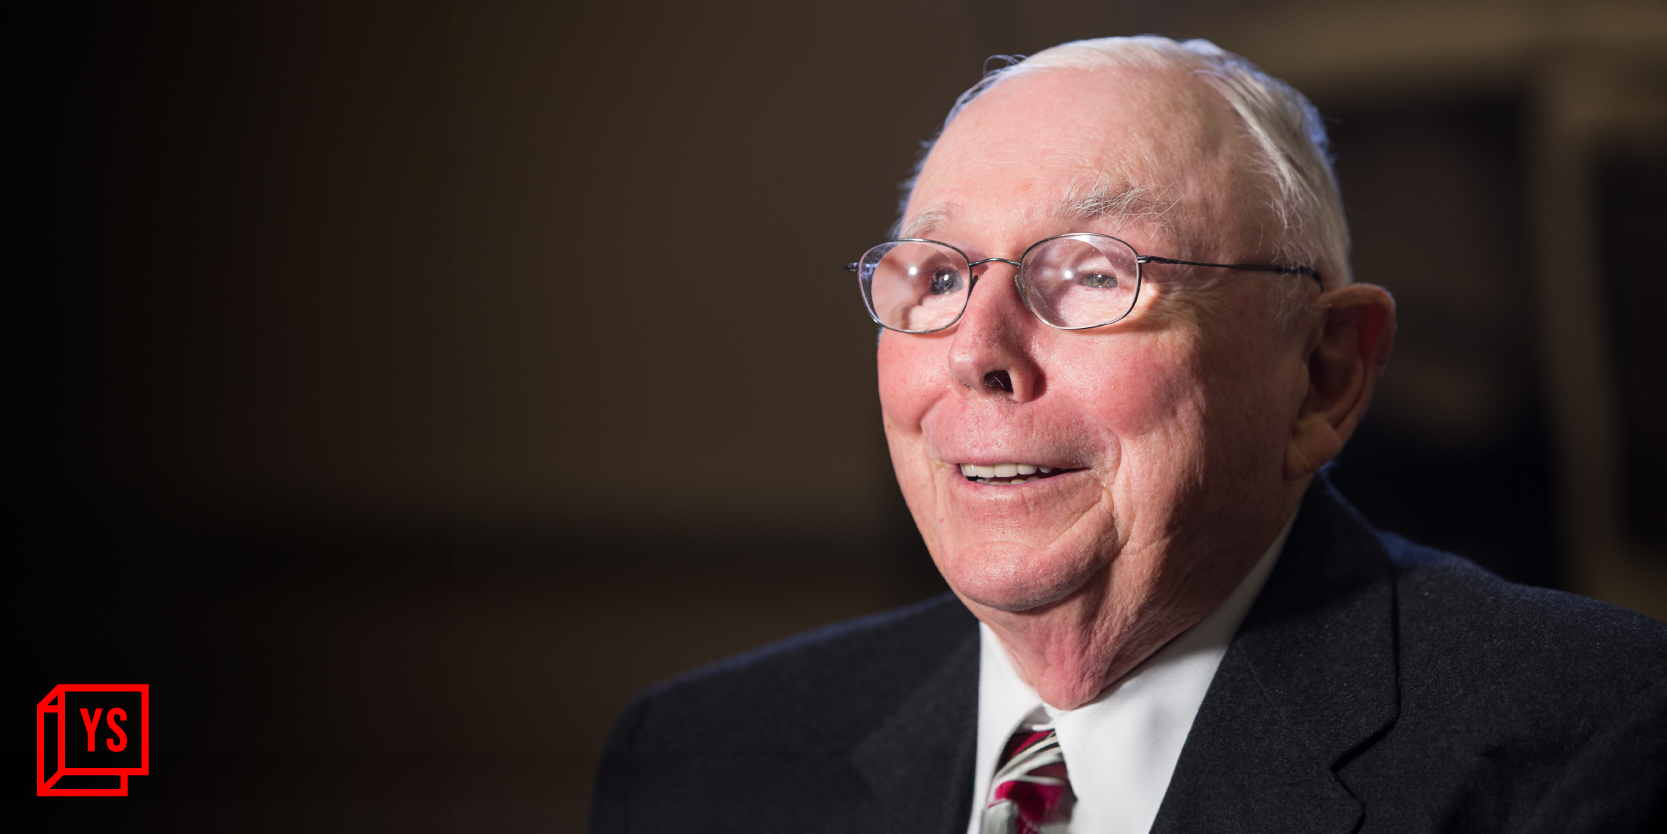 Charlie Munger's masterclass: Top 10 quotes with career wisdom